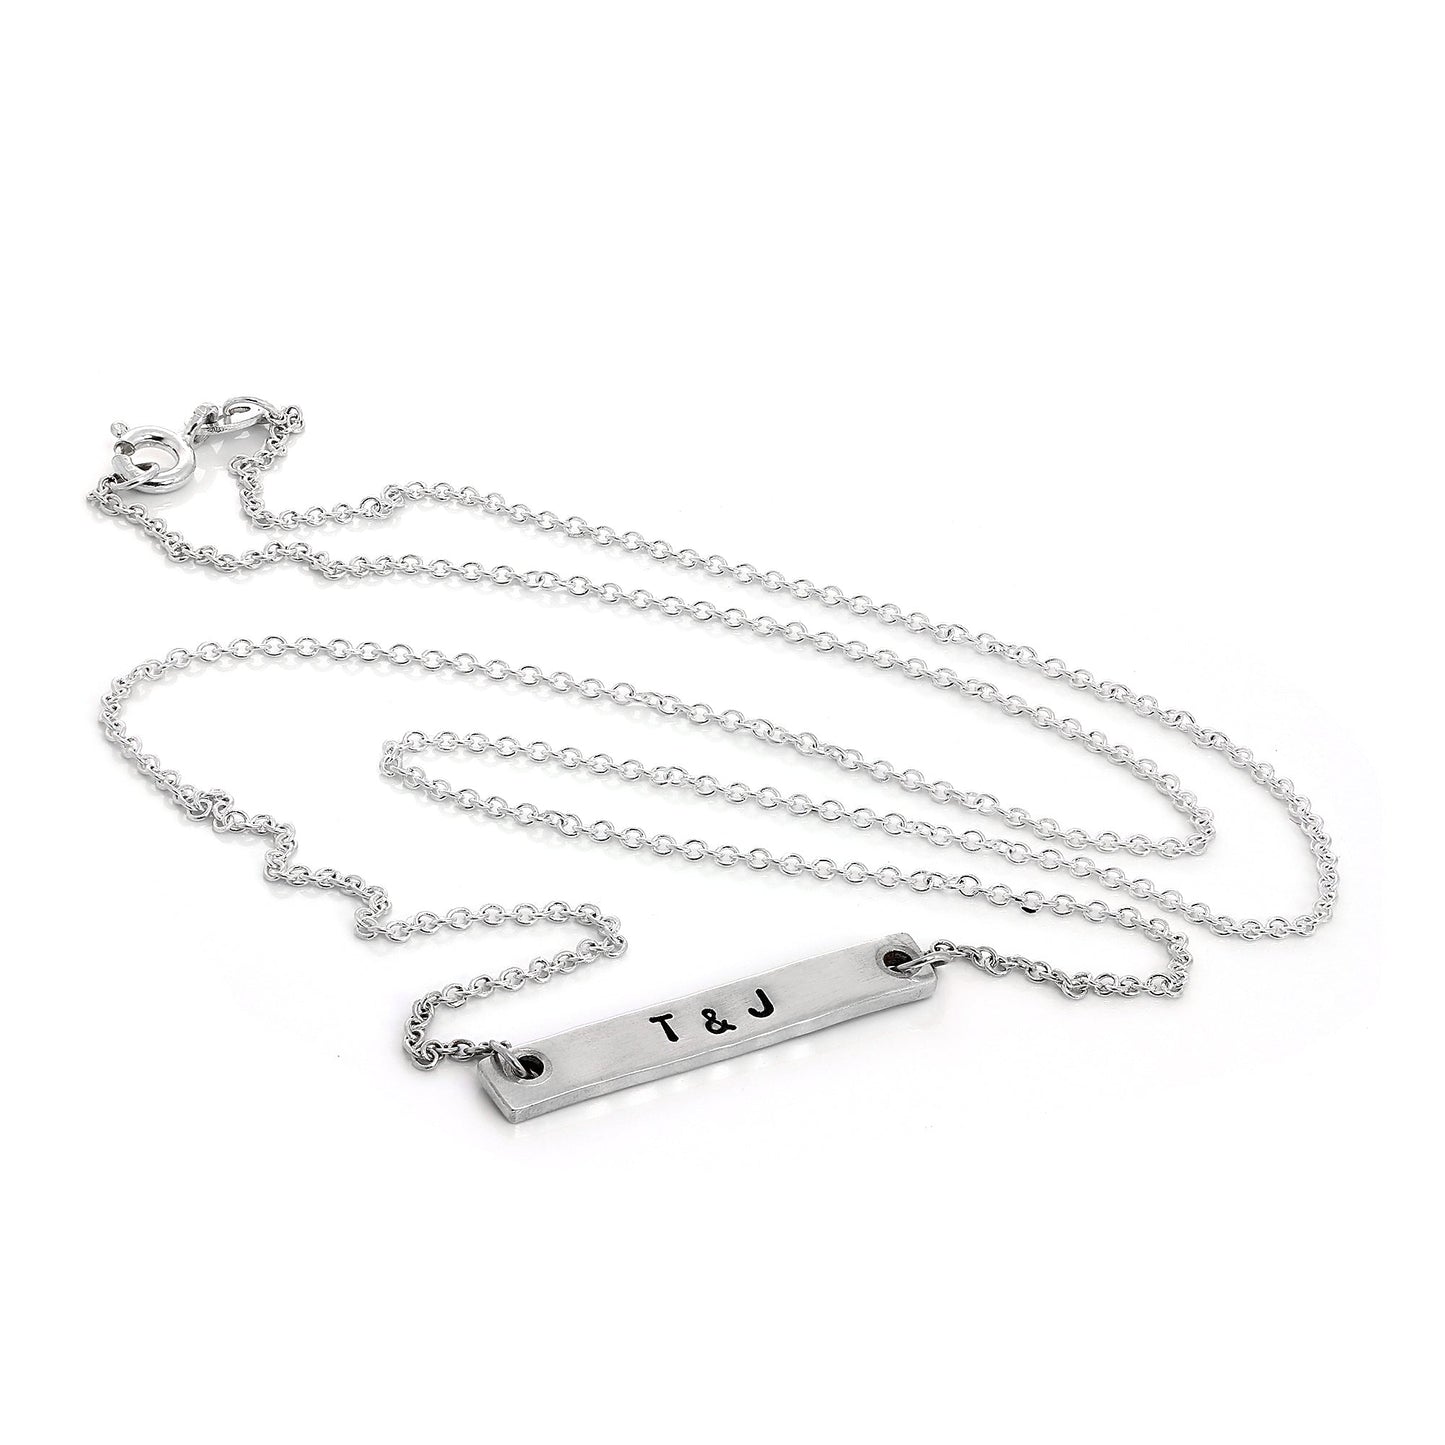 Personalised Sterling Silver Bar Necklace